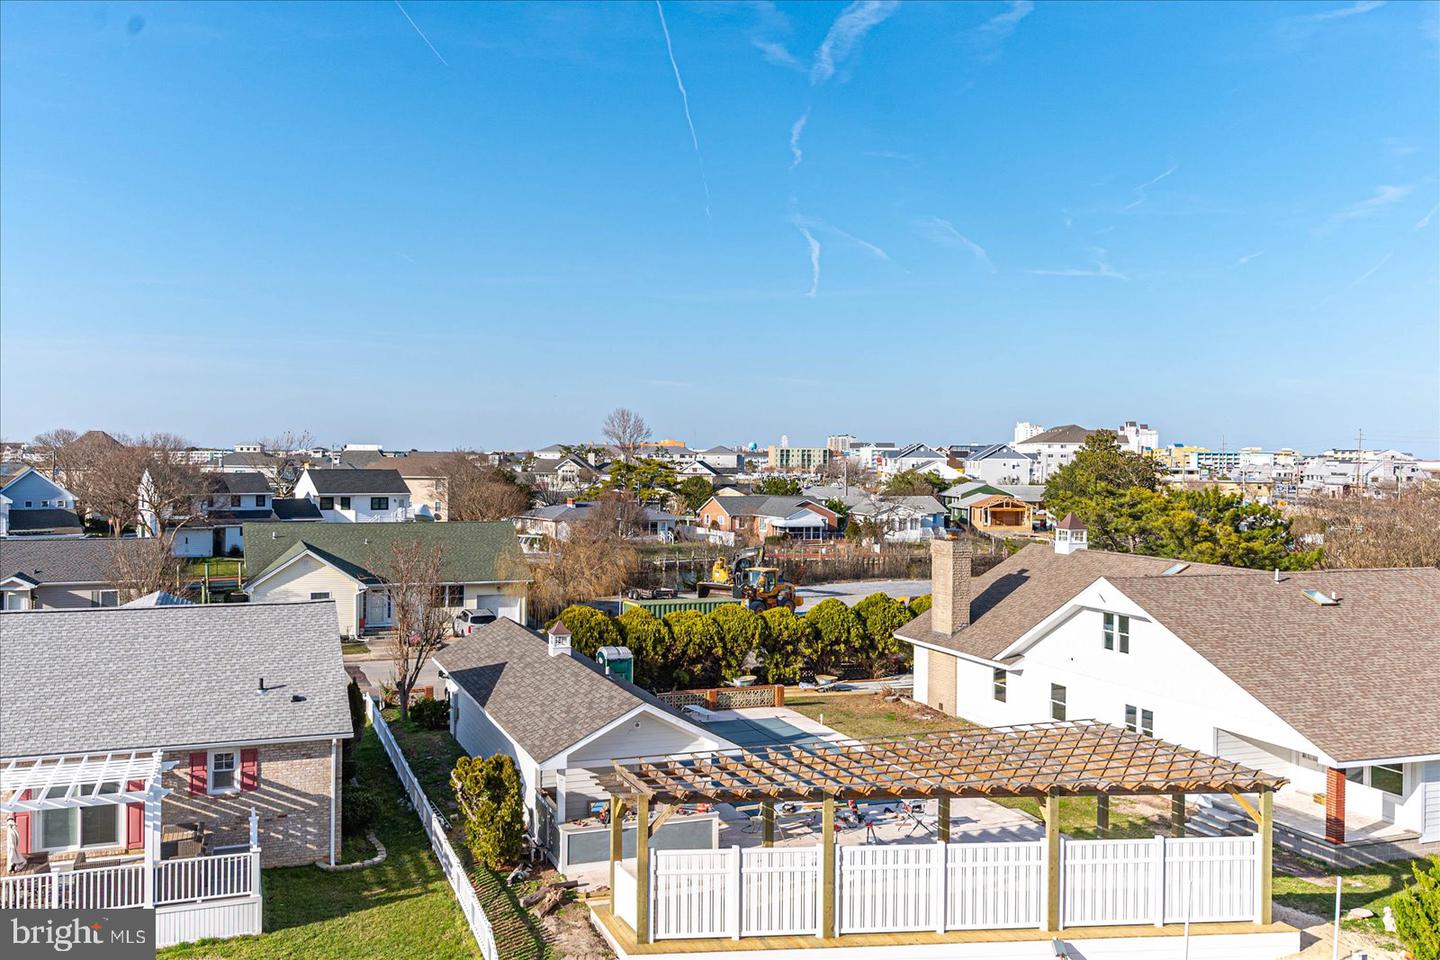 MDWO2019672-802922310514-2024-03-15-14-18-05 300 17th St #303 | Ocean City, MD Real Estate For Sale | MLS# Mdwo2019672  - 1st Choice Properties